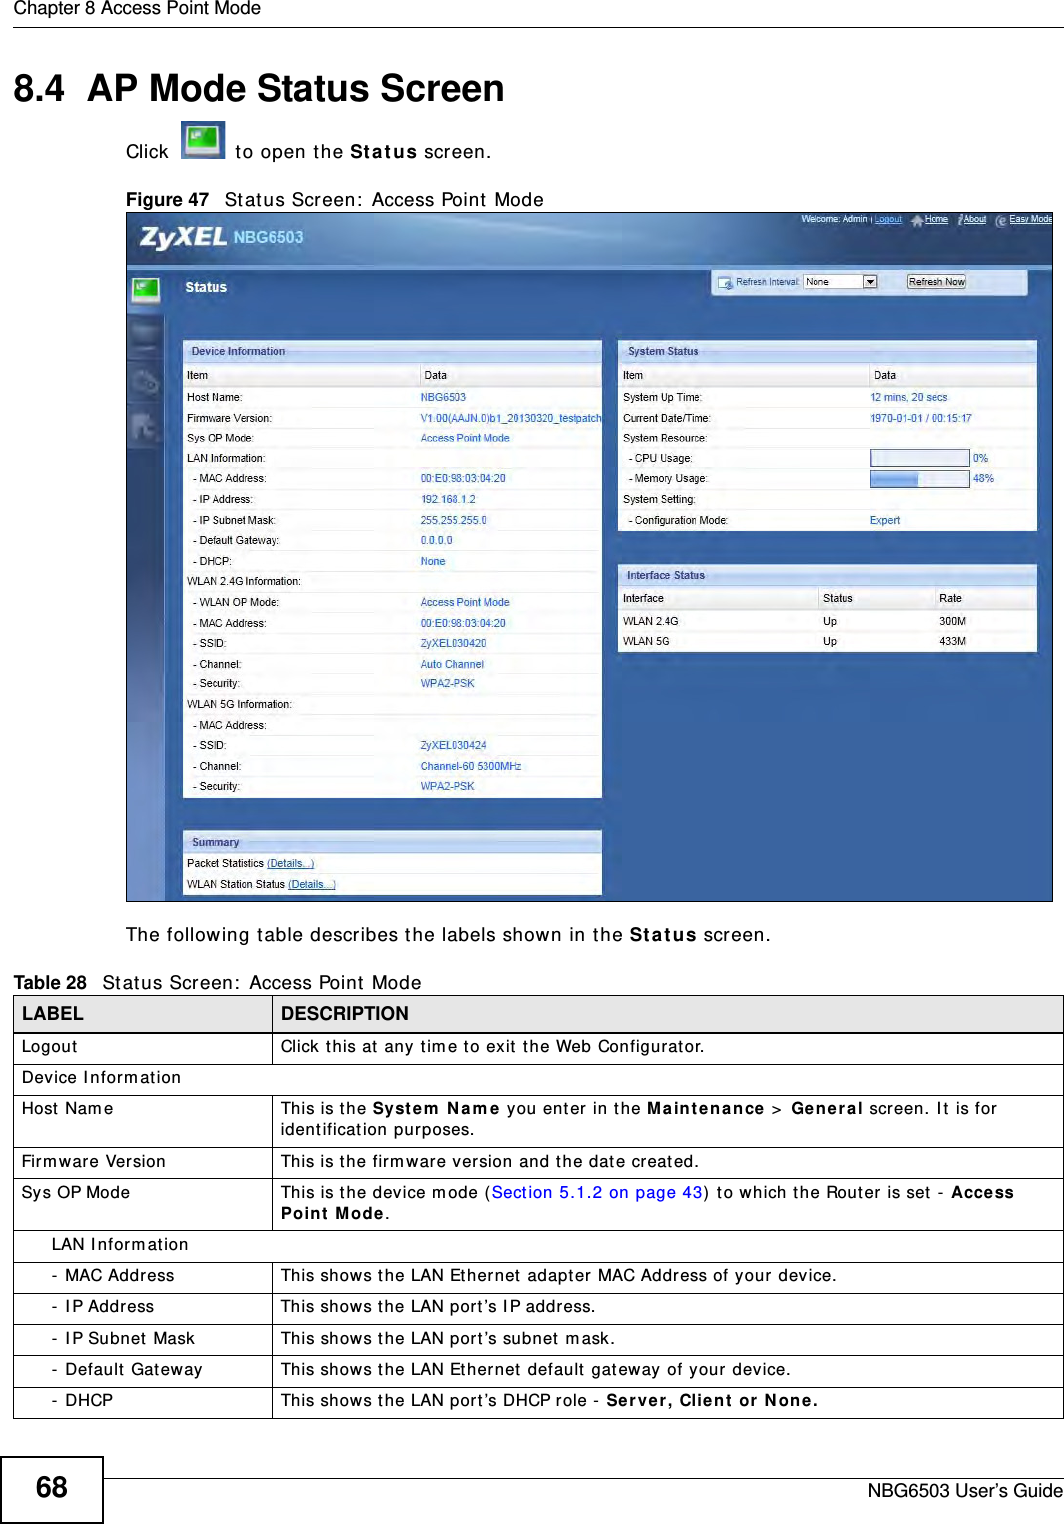 Chapter 8 Access Point ModeNBG6503 User’s Guide688.4  AP Mode Status ScreenClick   to open the Status screen. Figure 47   Status Screen: Access Point Mode The following table describes the labels shown in the Status screen.Table 28   Status Screen: Access Point Mode LABEL DESCRIPTIONLogout Click this at any time to exit the Web Configurator.Device InformationHost Name This is the System Name you enter in the Maintenance &gt; General screen. It is for identification purposes.Firmware Version This is the firmware version and the date created. Sys OP Mode This is the device mode (Section 5.1.2 on page 43) to which the Router is set - Access Point Mode.LAN Information- MAC Address This shows the LAN Ethernet adapter MAC Address of your device.- IP Address This shows the LAN port’s IP address.- IP Subnet Mask This shows the LAN port’s subnet mask.- Default Gateway This shows the LAN Ethernet default gateway of your device.- DHCP This shows the LAN port’s DHCP role - Server, Client or None.